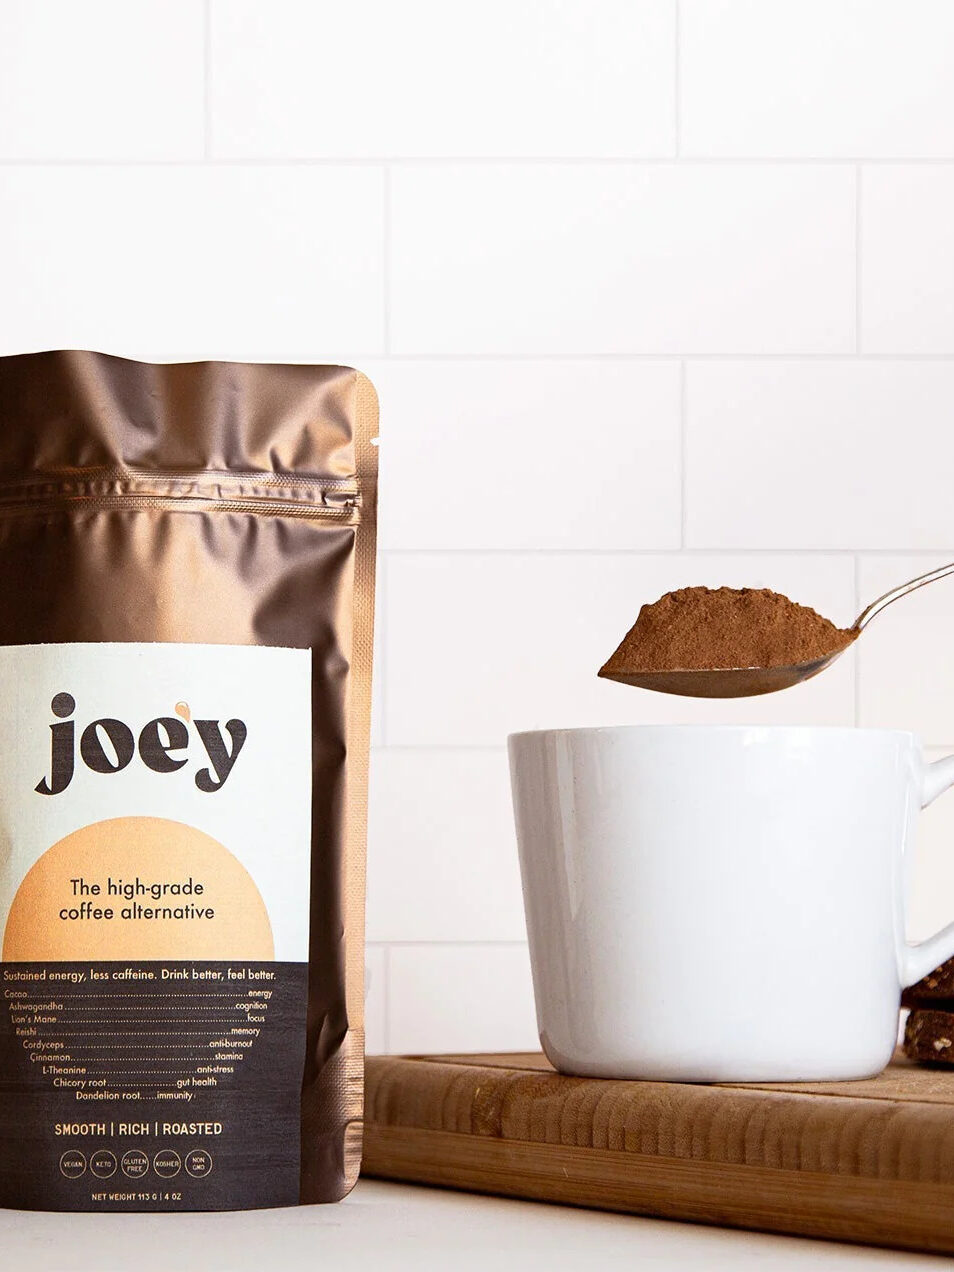 A pack of Joe'y coffee alternative to the left of a white mug. A spoon filled with the coffee alternative is about to be added to the mug.